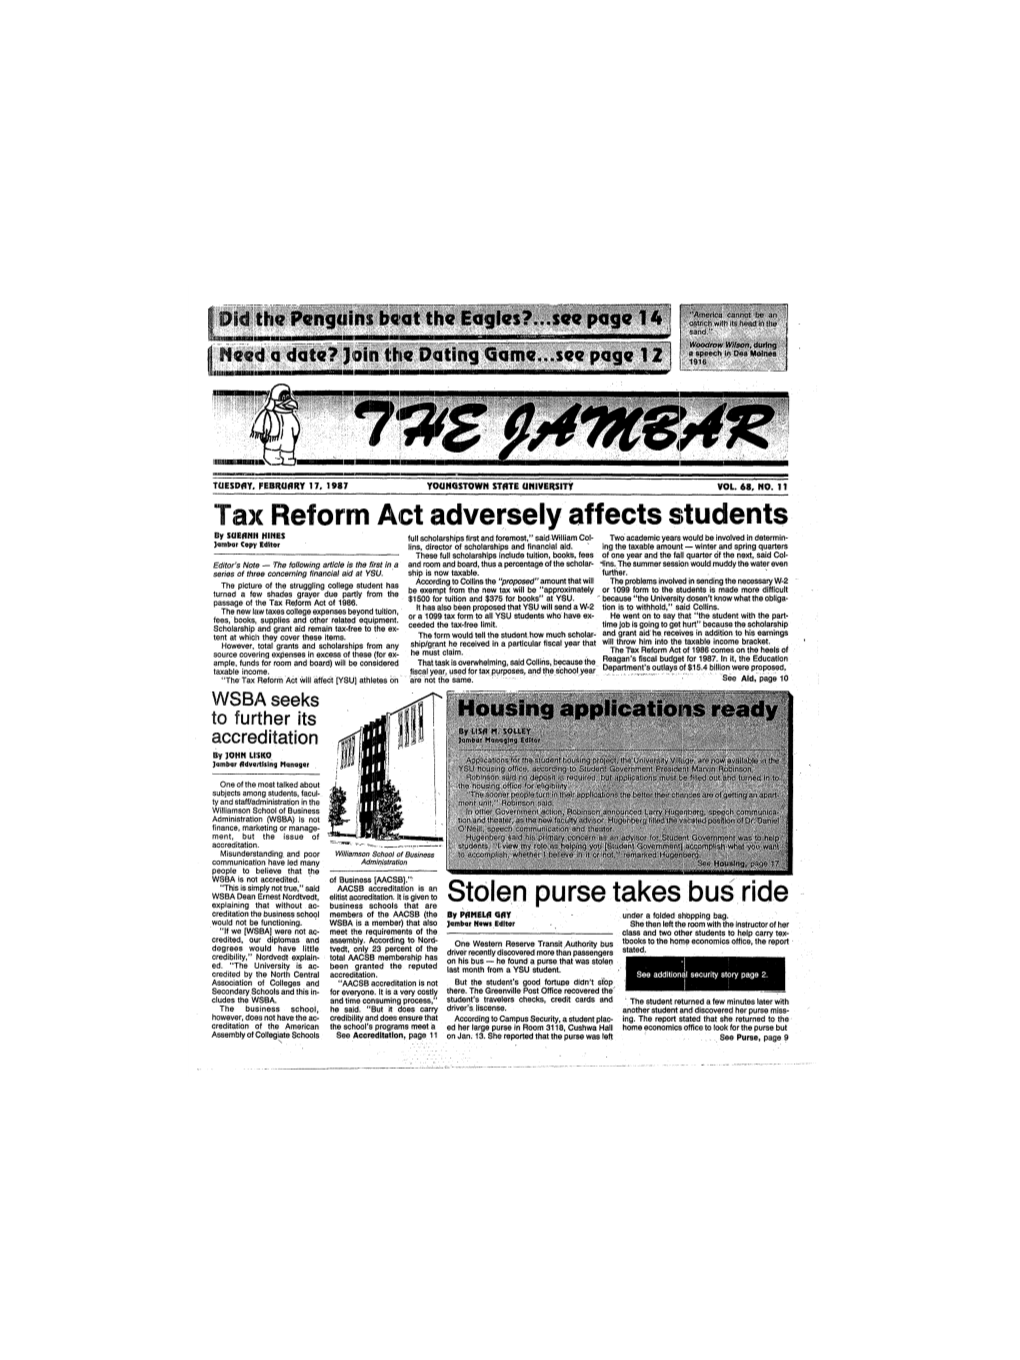 Reform Act Adversely Affects Students